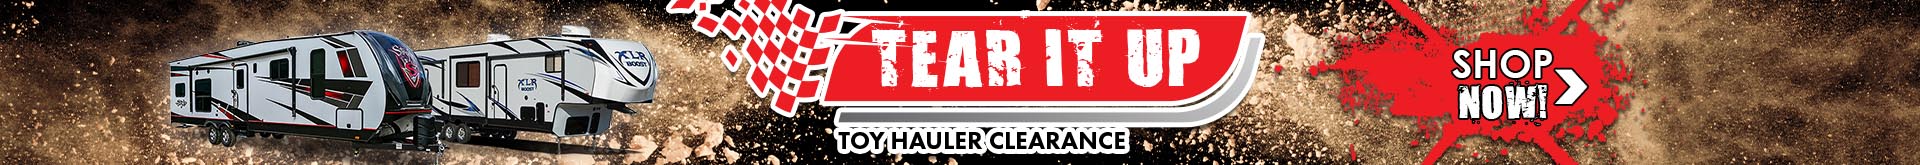 Tear it Up Toy Hauler Clearance